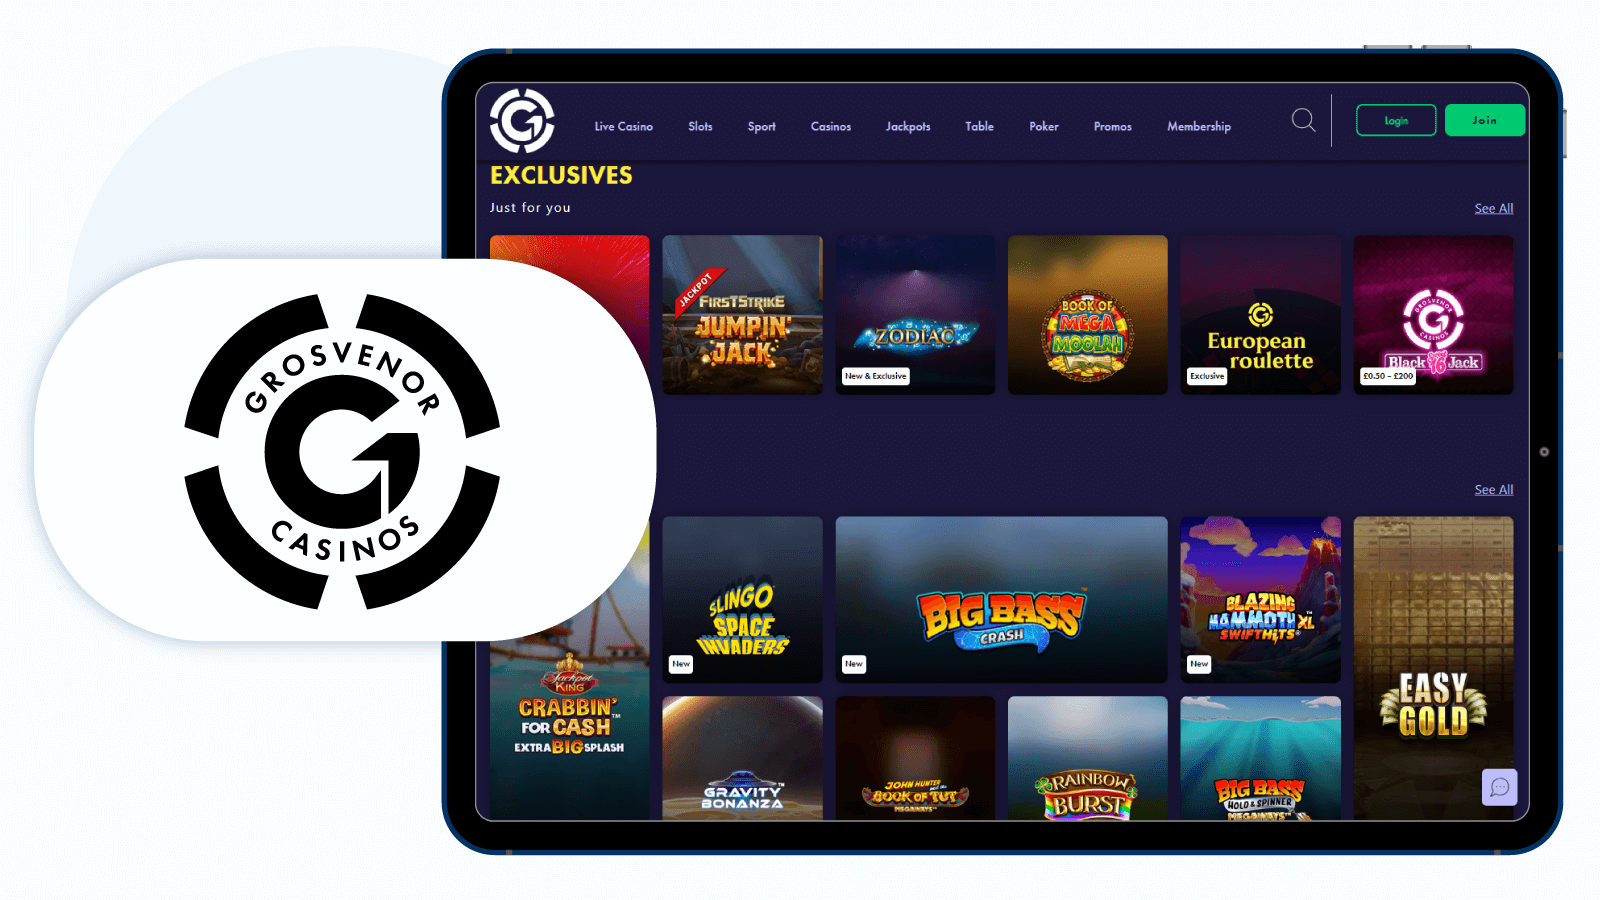 Grosvenor Casino – Top Microgaming Casino for Fast Withdrawals